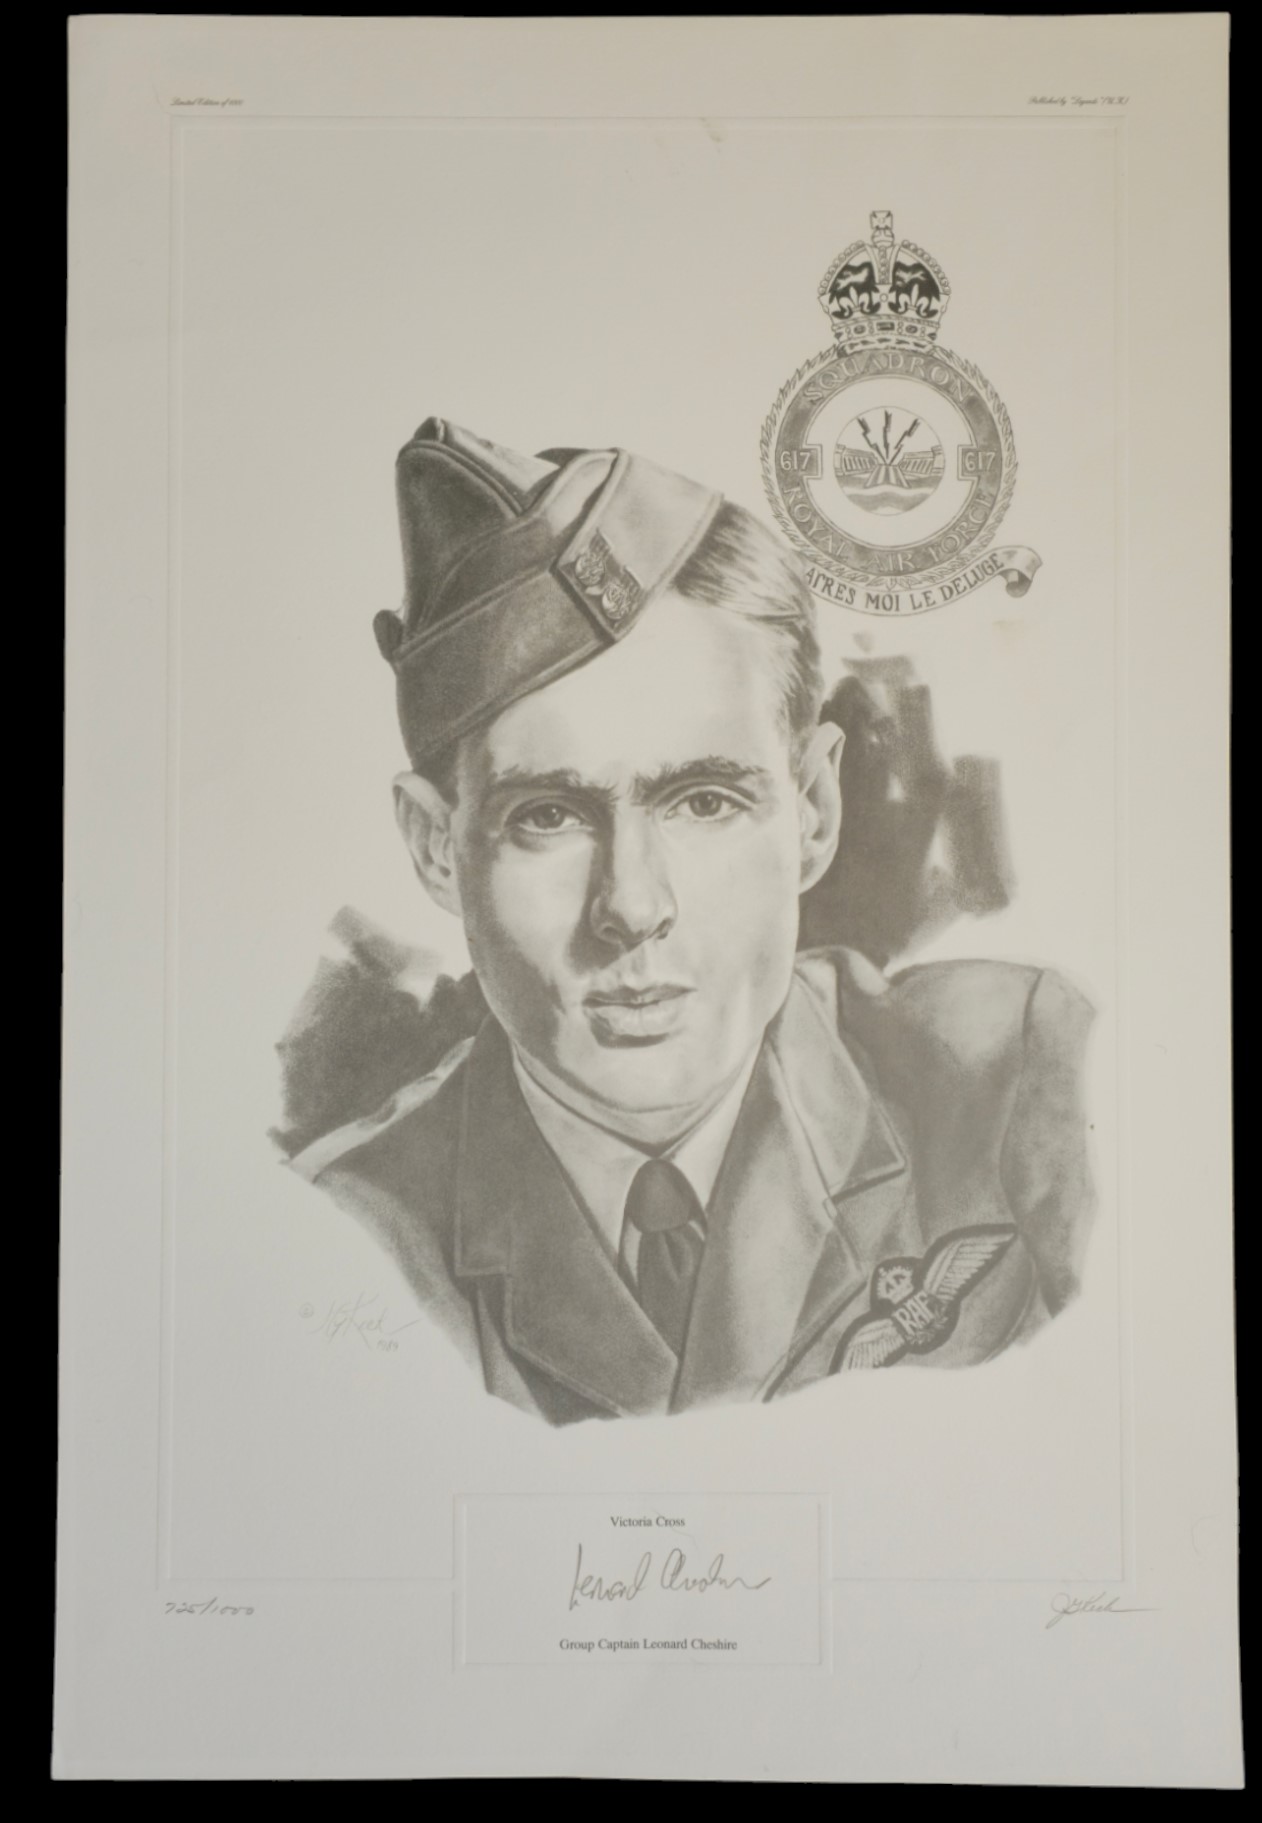 Grp Cptn Leonard Cheshire Signed KG Keck Black and White Print. 725/1000. Signed In Pencil by